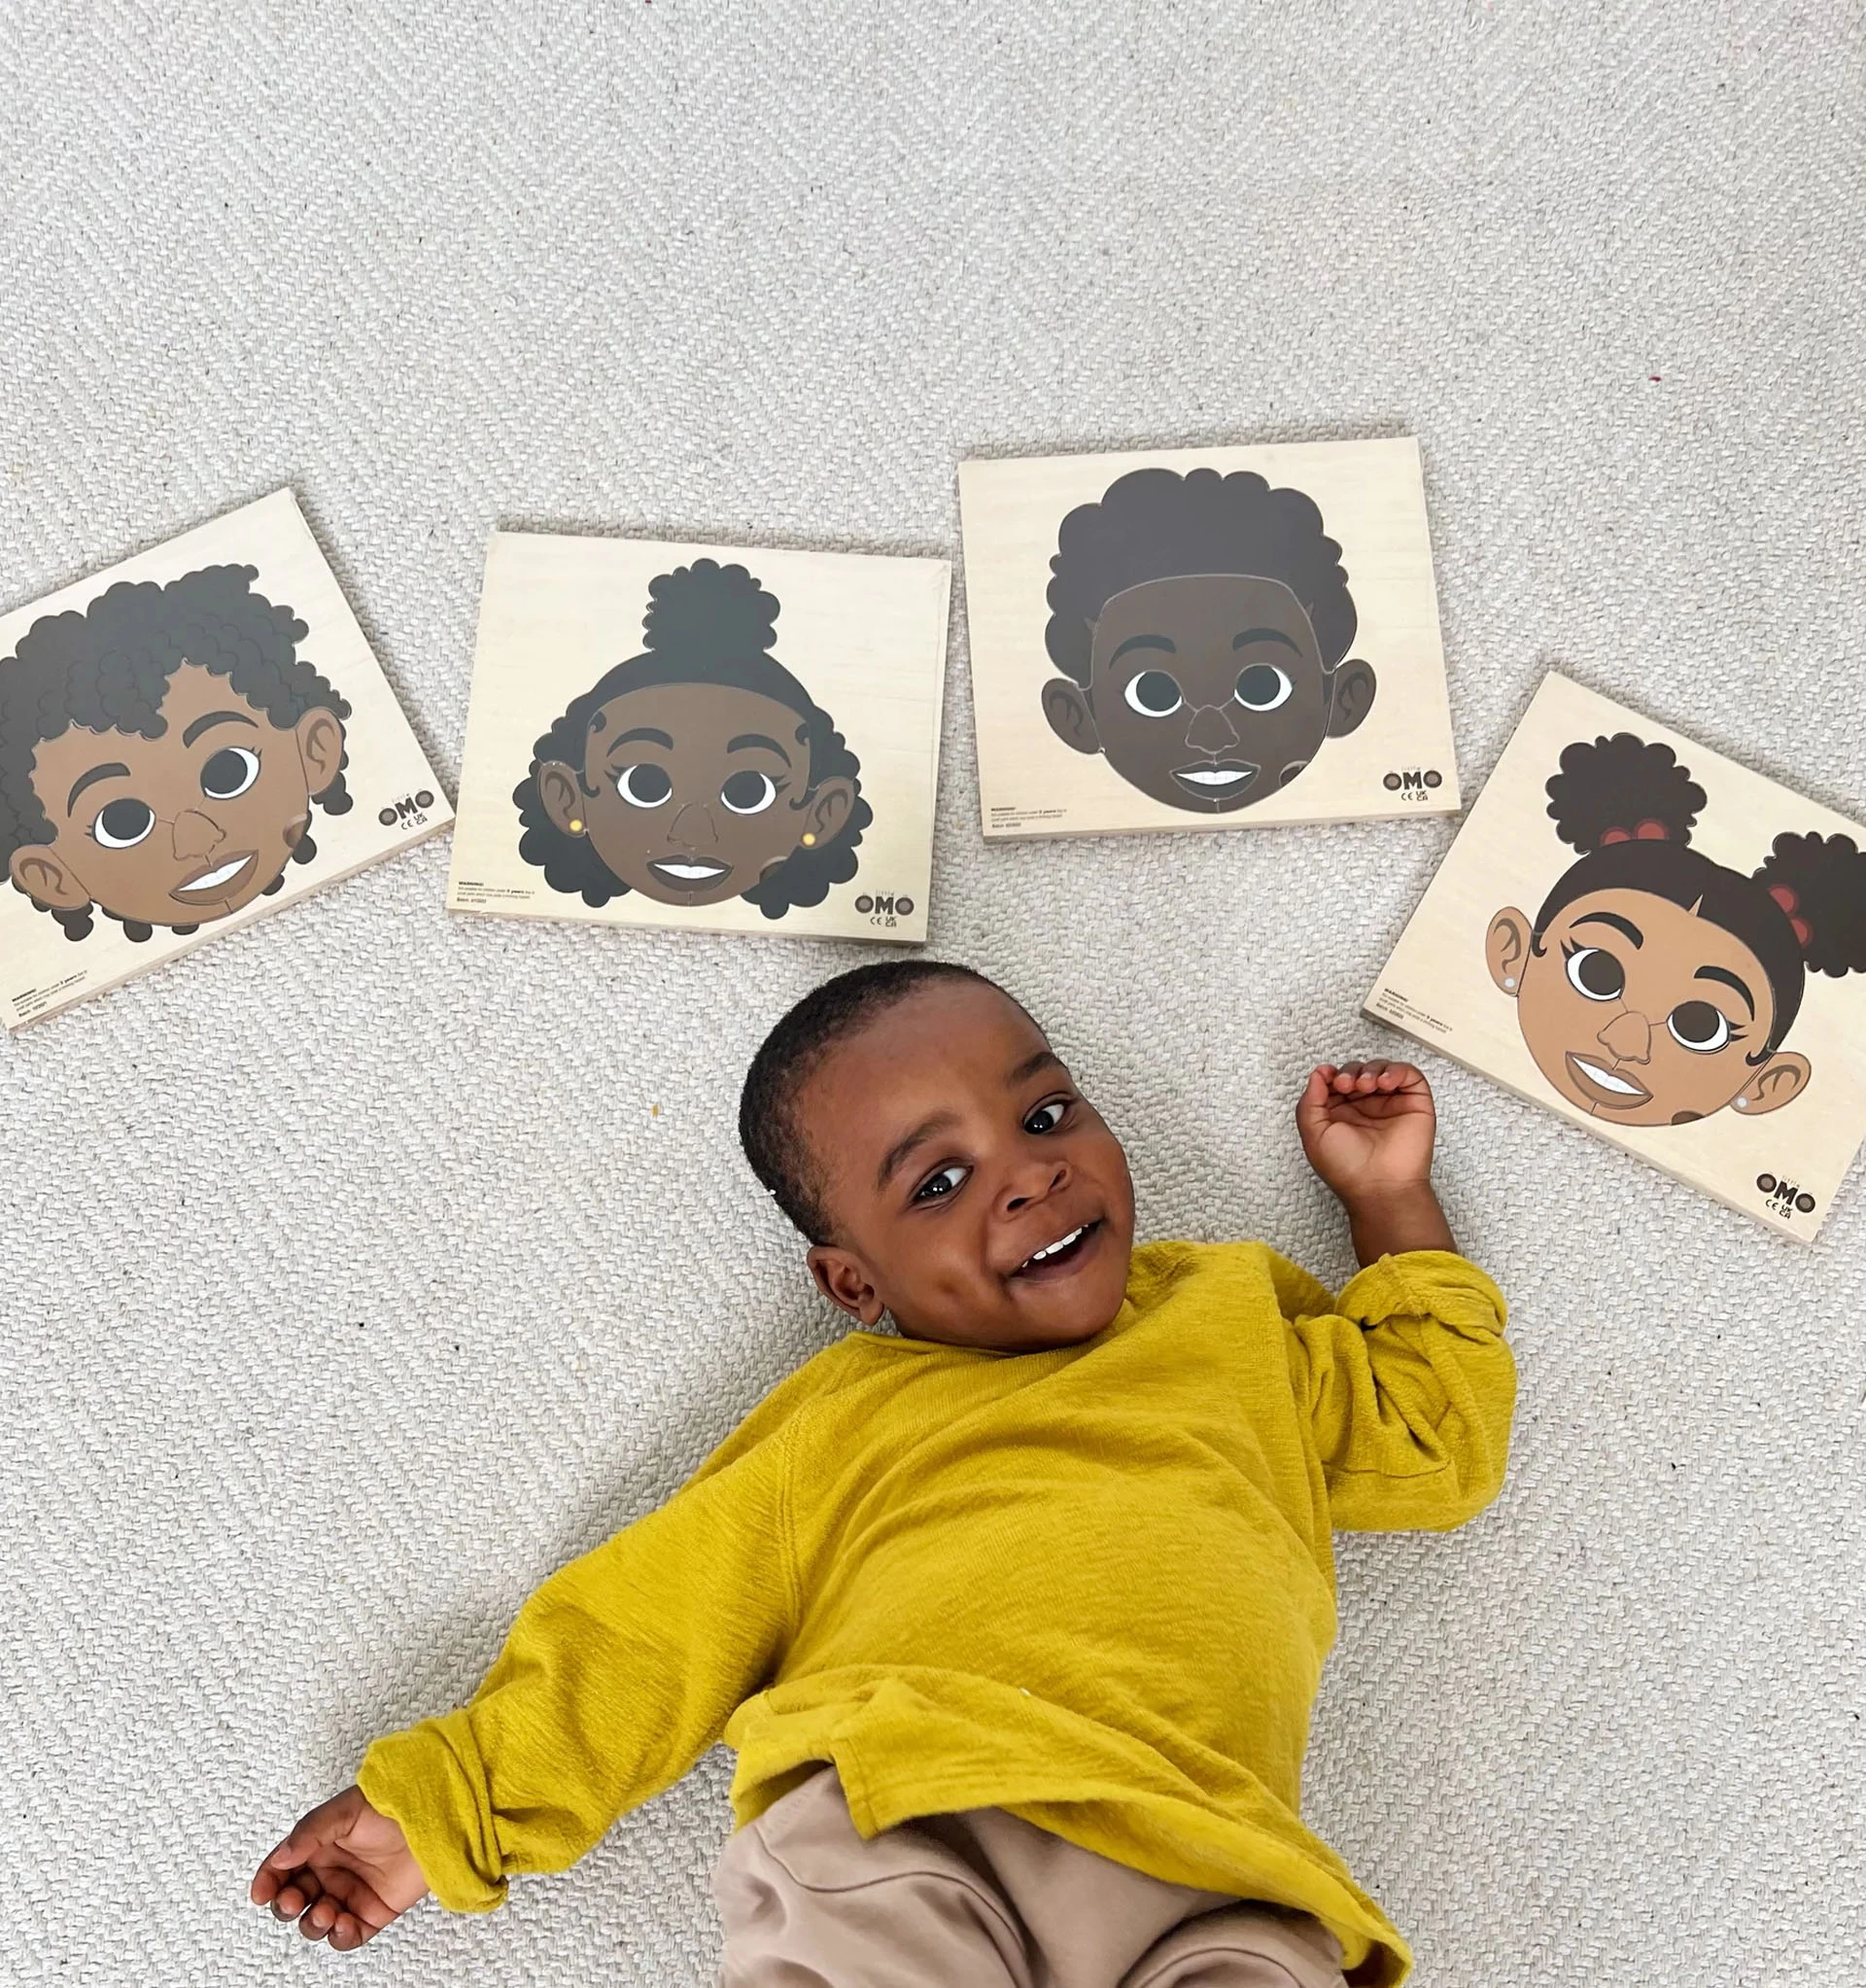 Isaiah with the five characters of the face puzzle